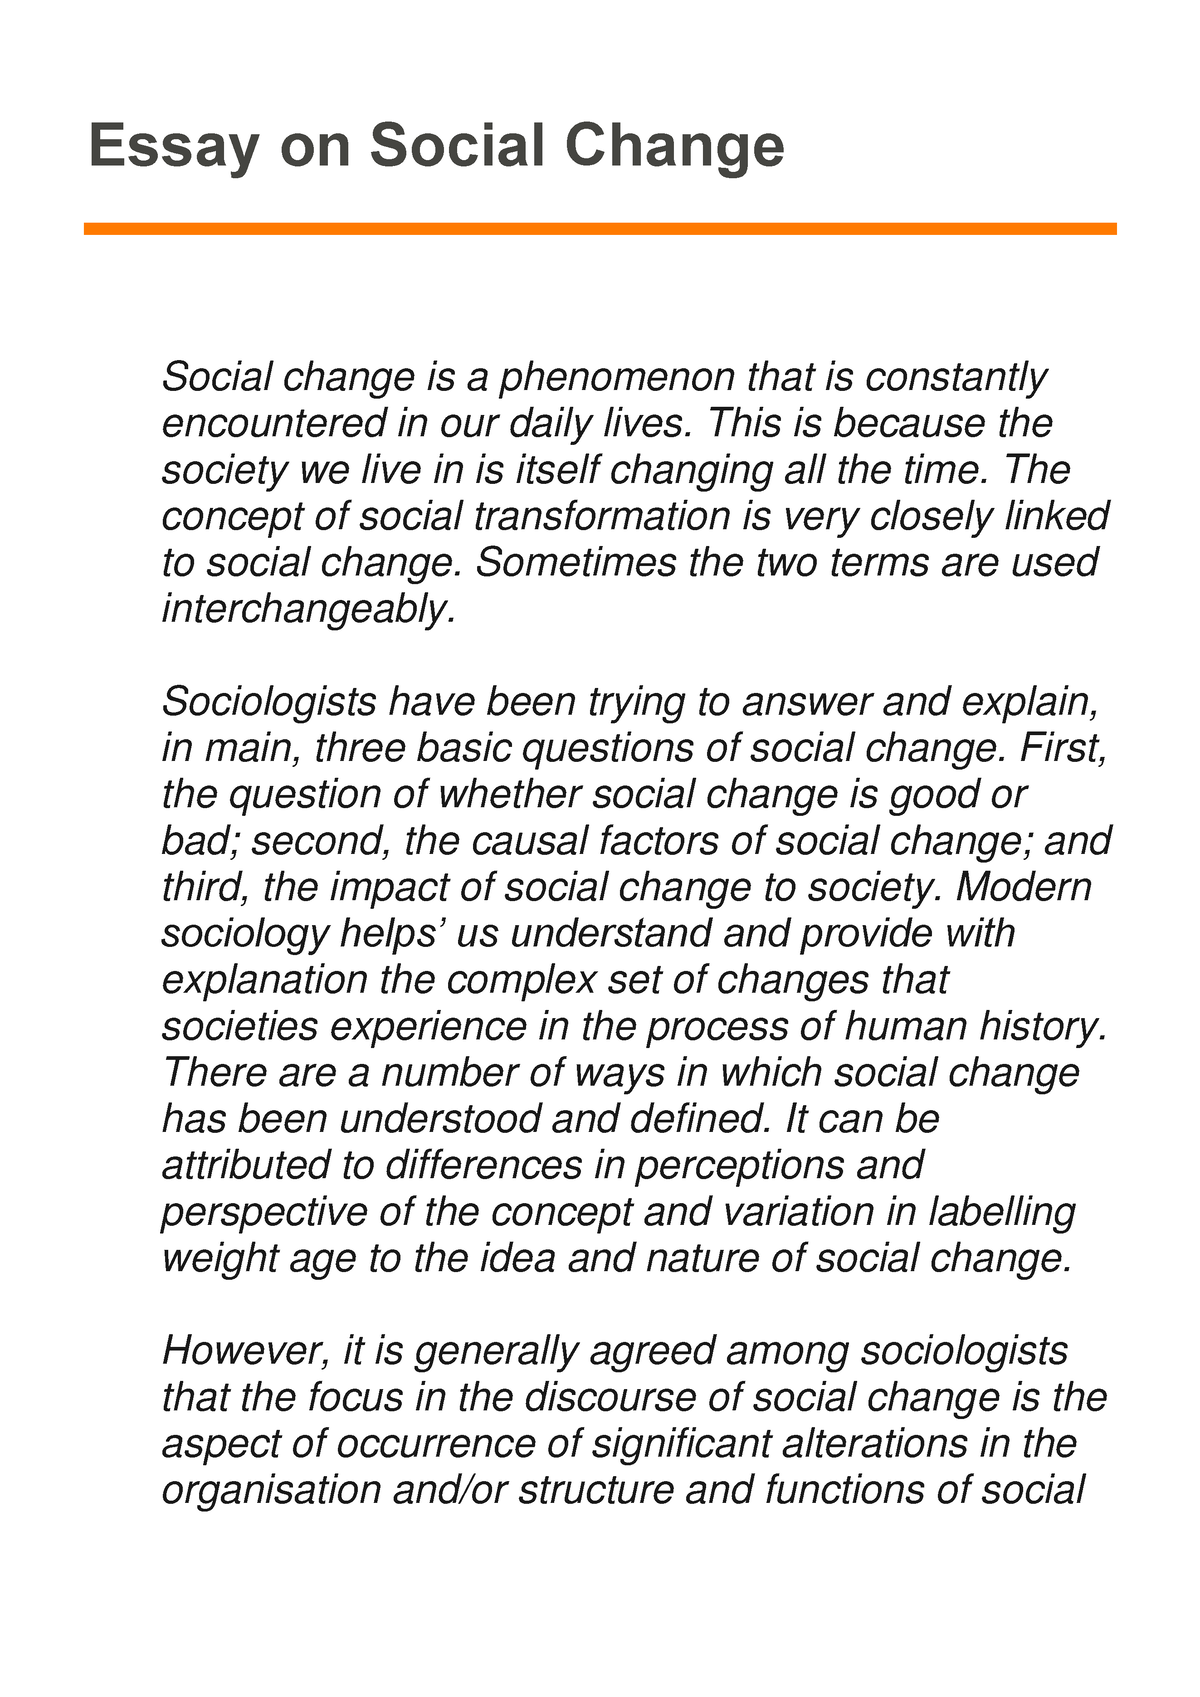 write a discussion essay about an example of social change